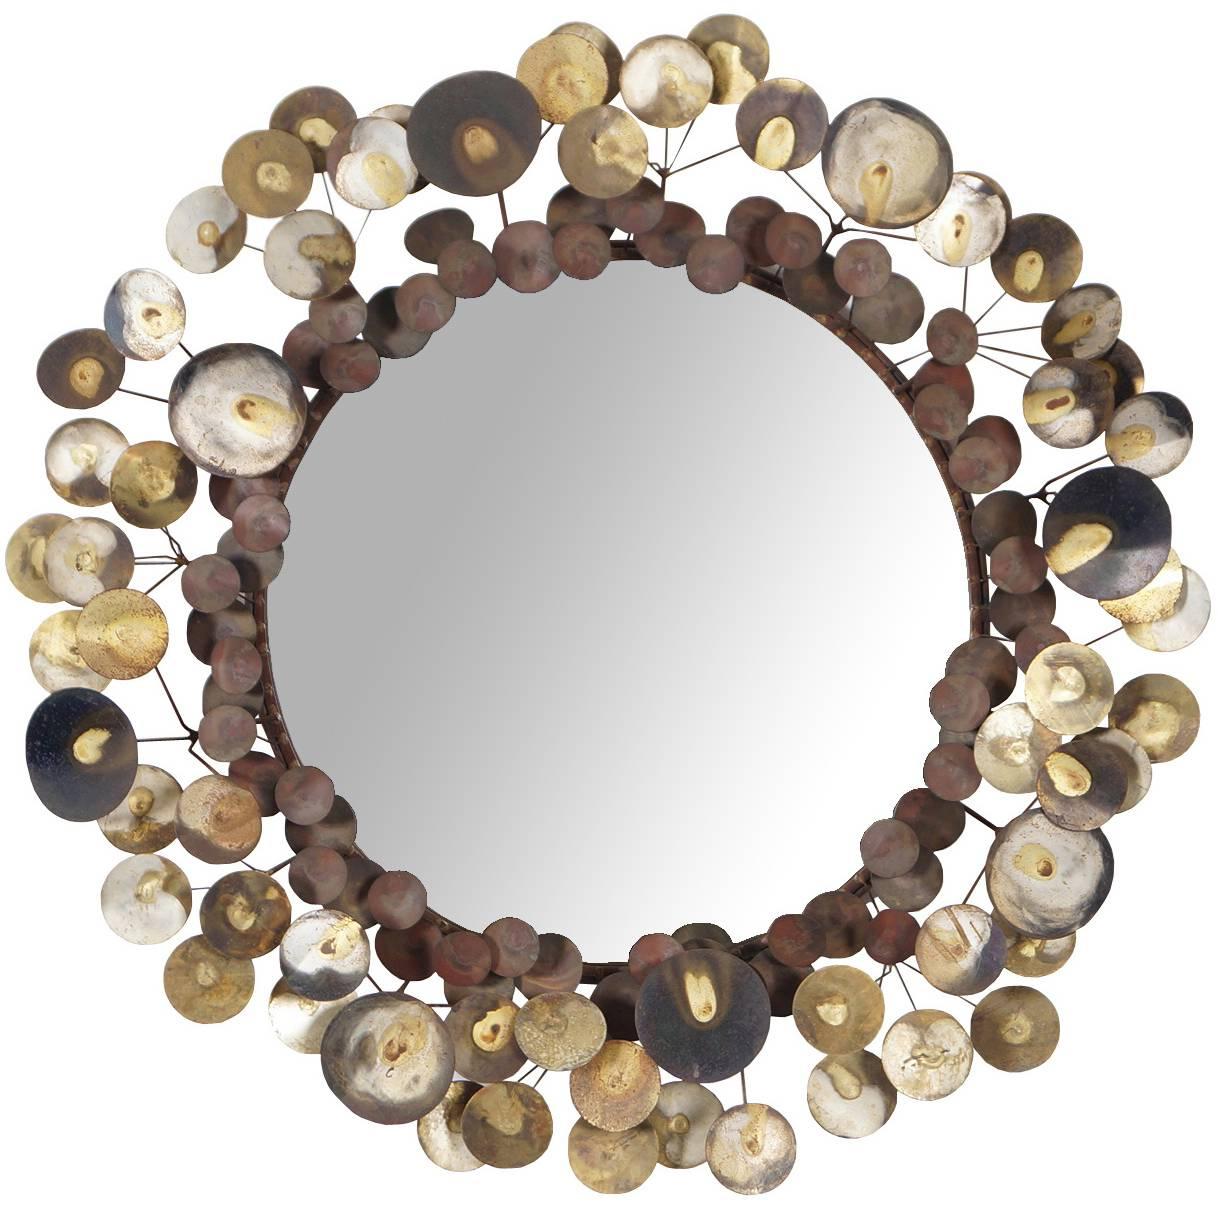 Vintage "Raindrops" Wall Mirror by Curtis Jere